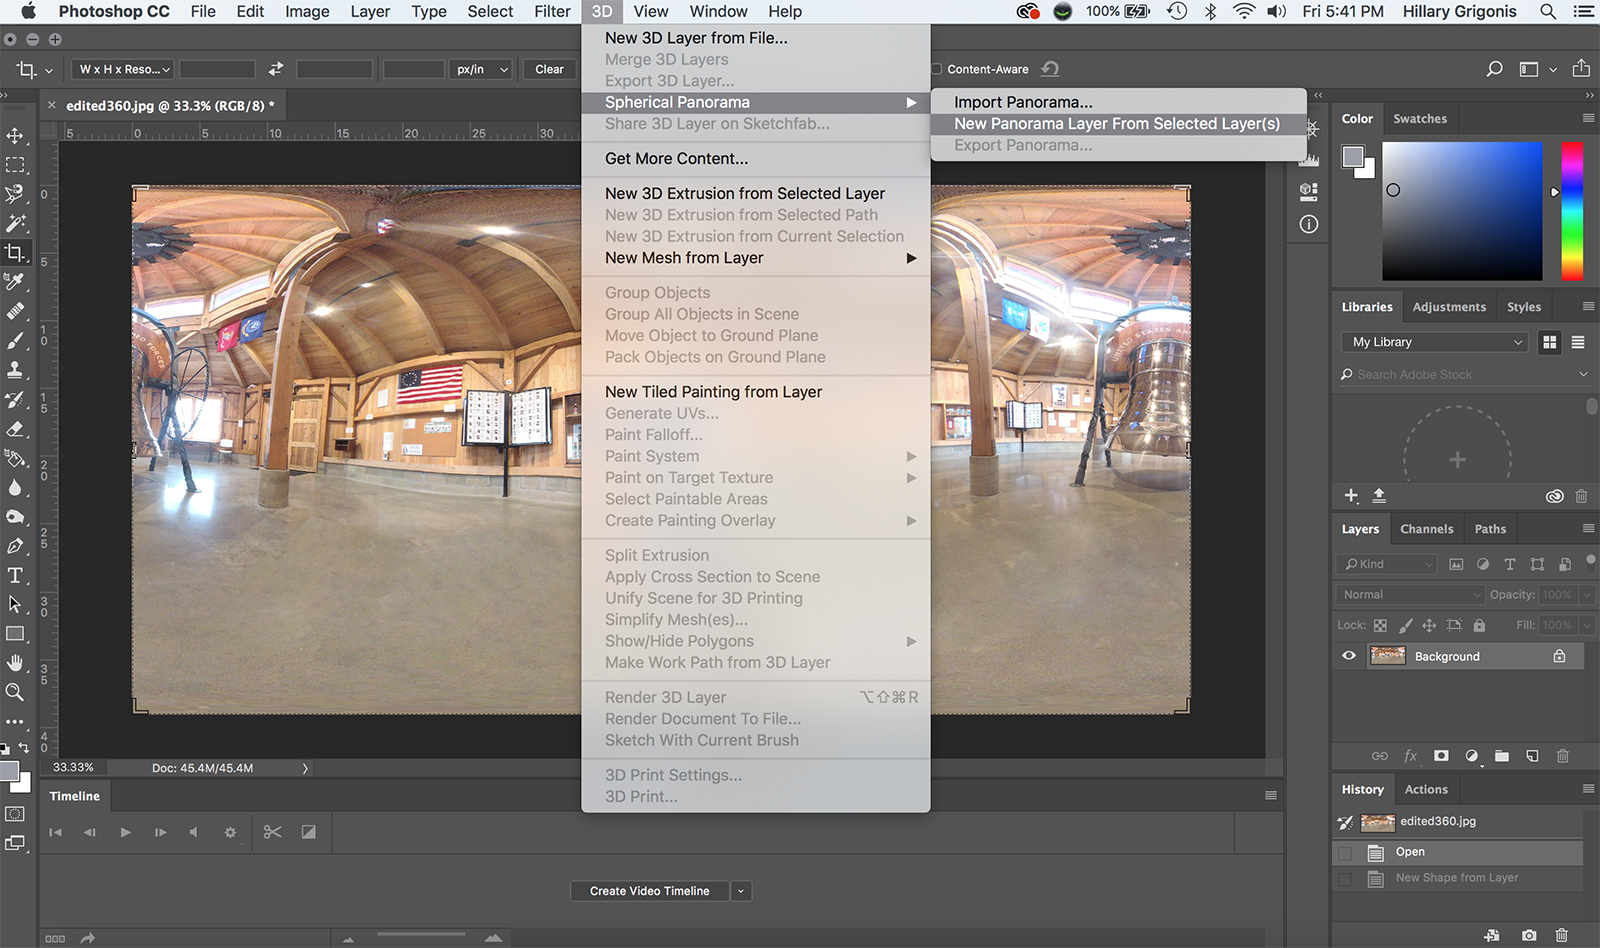 Now you can edit 360 photos in Photoshop … here's how